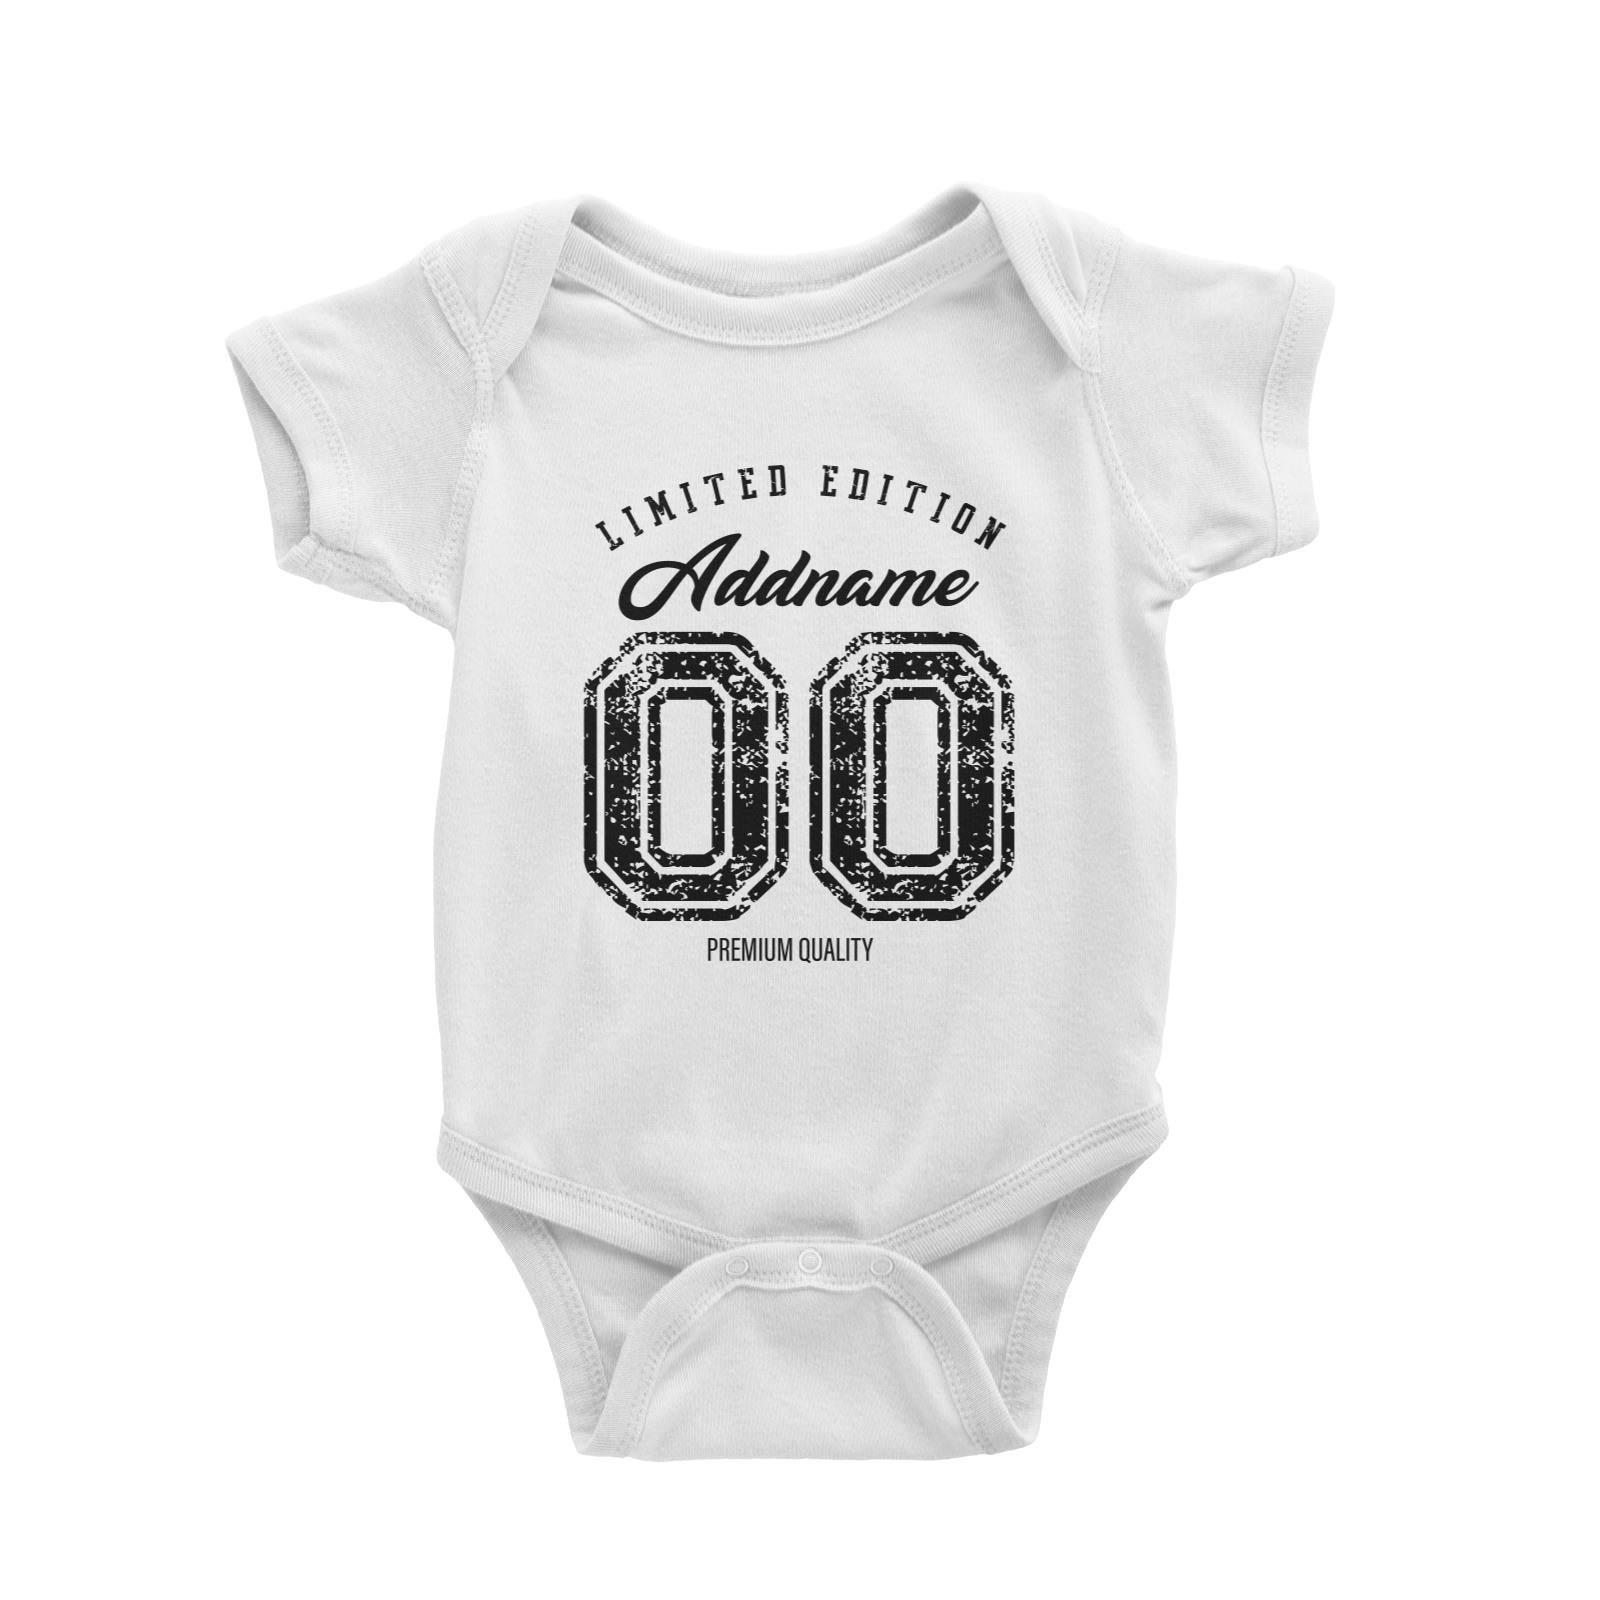 Limited Edition Premium Quality Personalizable with Name and Number Baby Romper